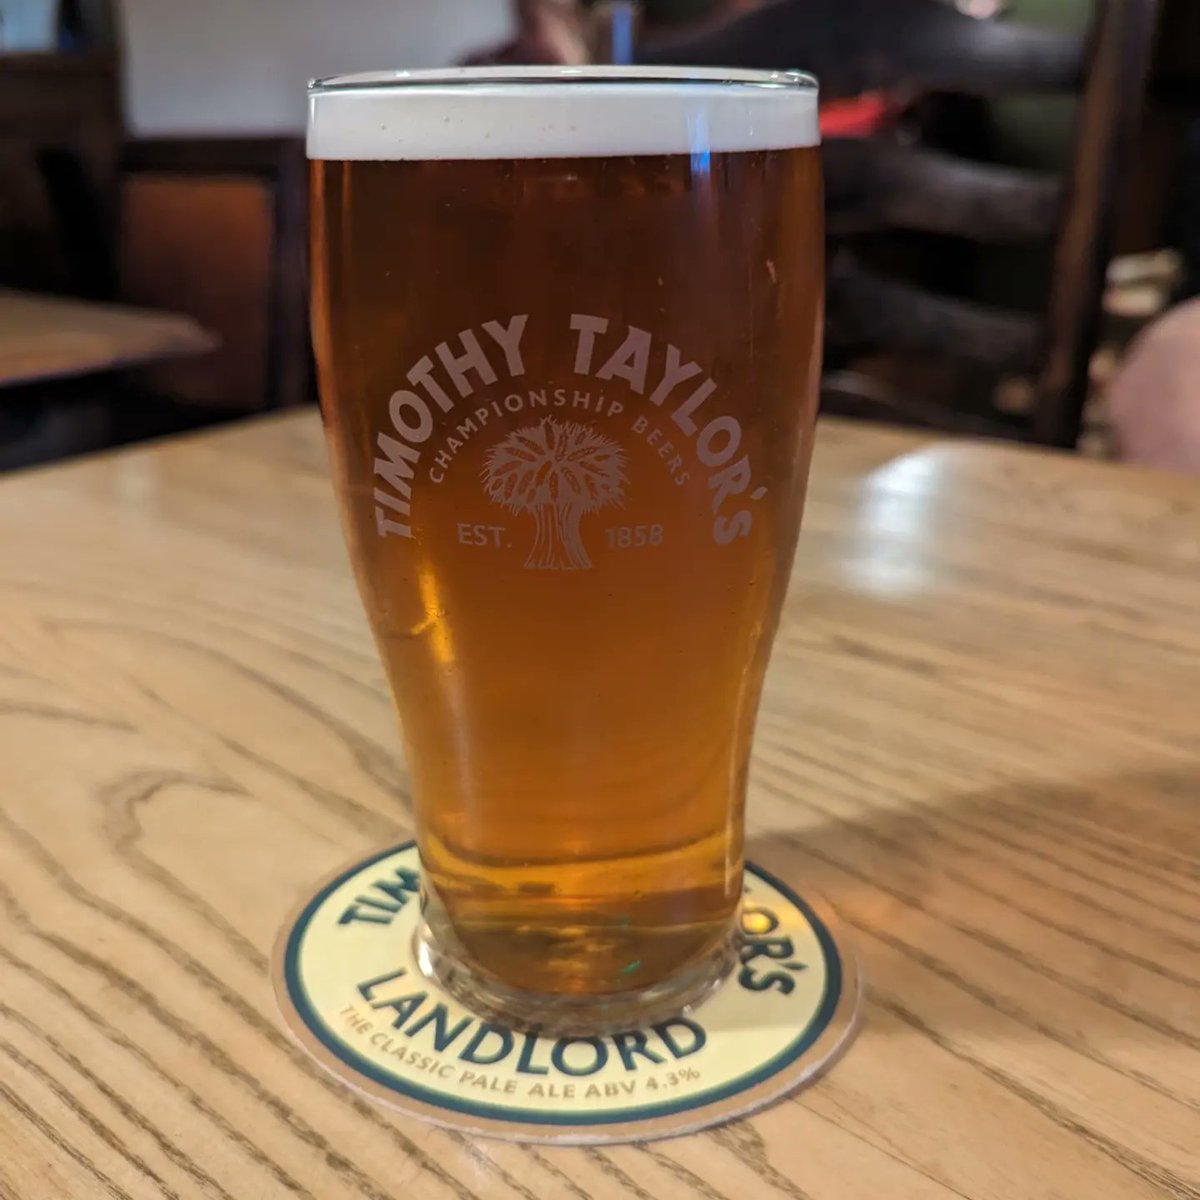 Joyful pint of @TimothyTaylors Landlord after a nice day of catching up with @northwest200 and wandering around the Settle crags.